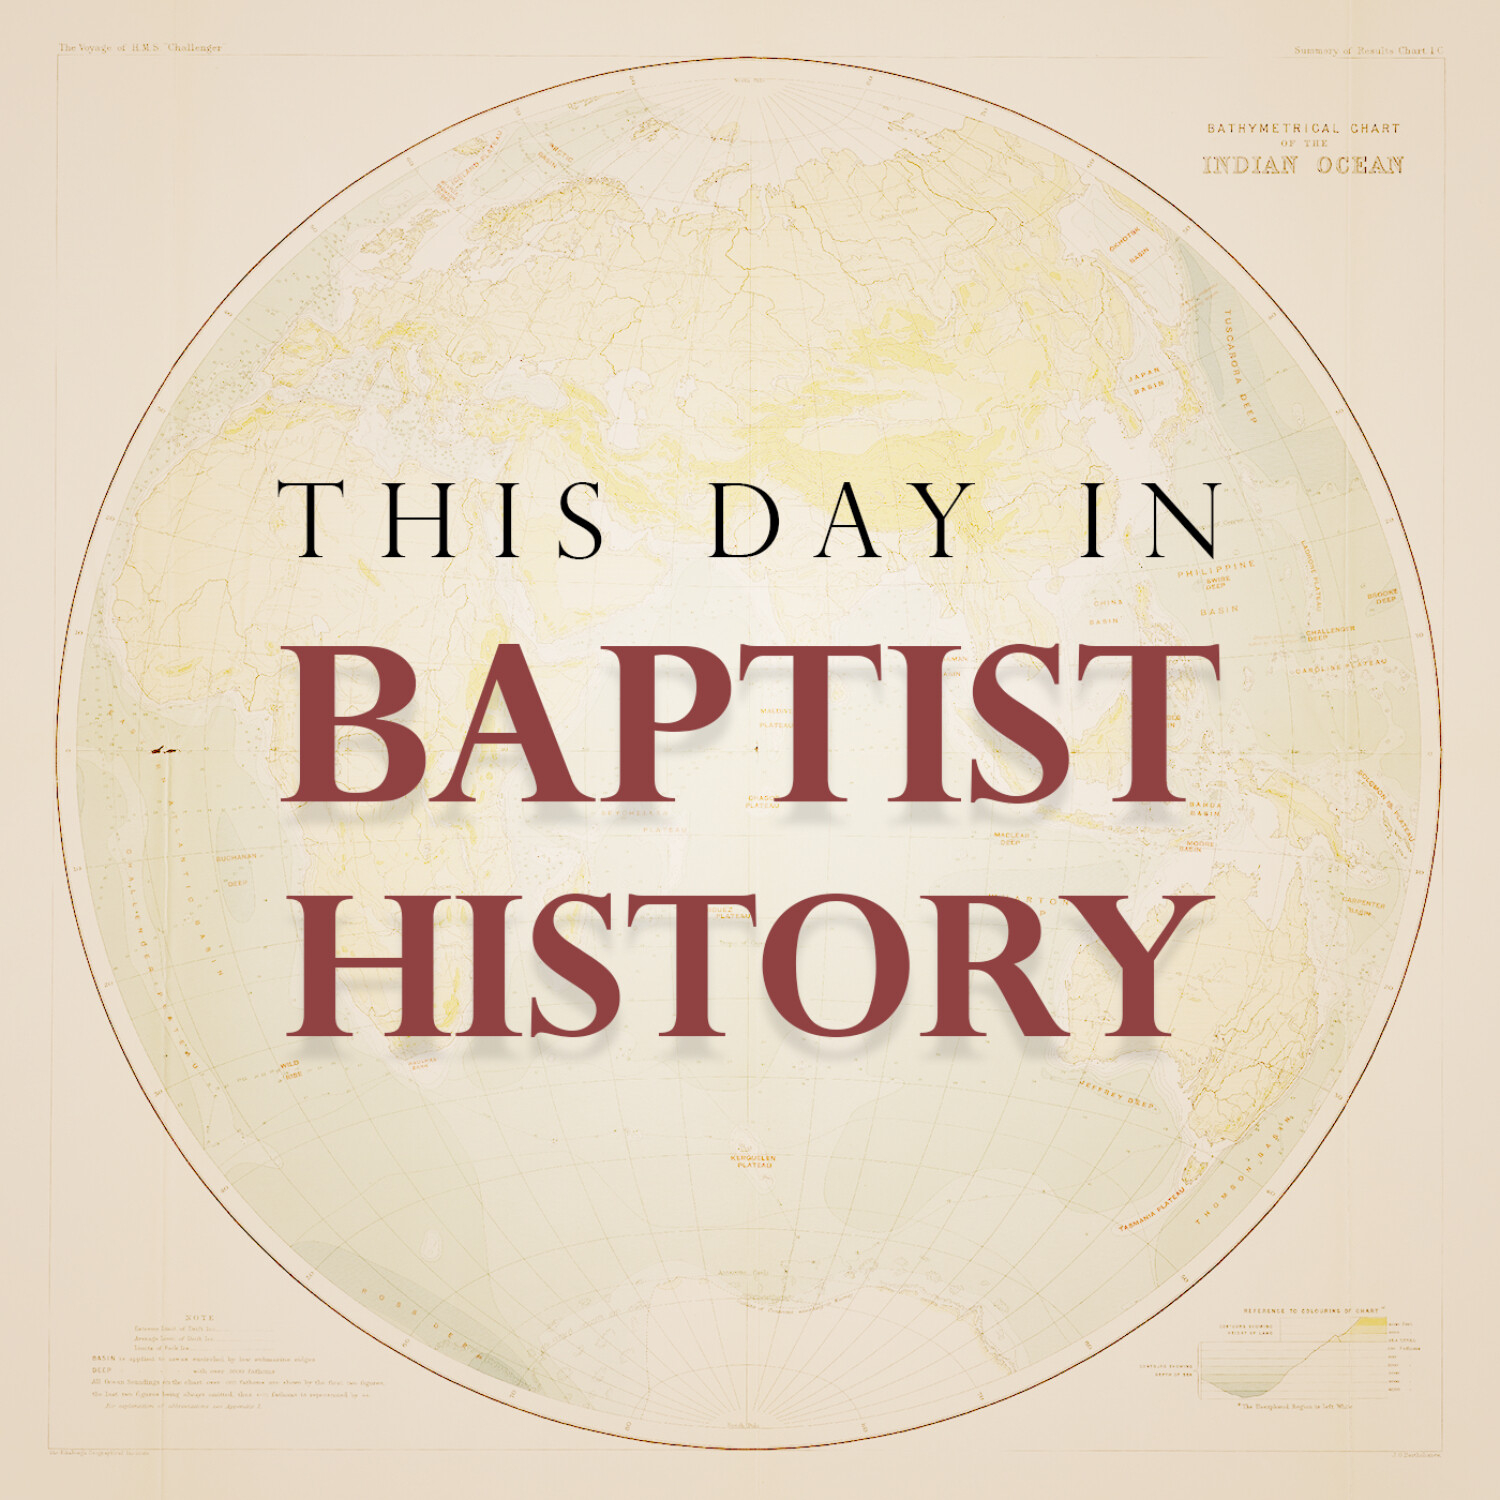 This Day in Baptist History